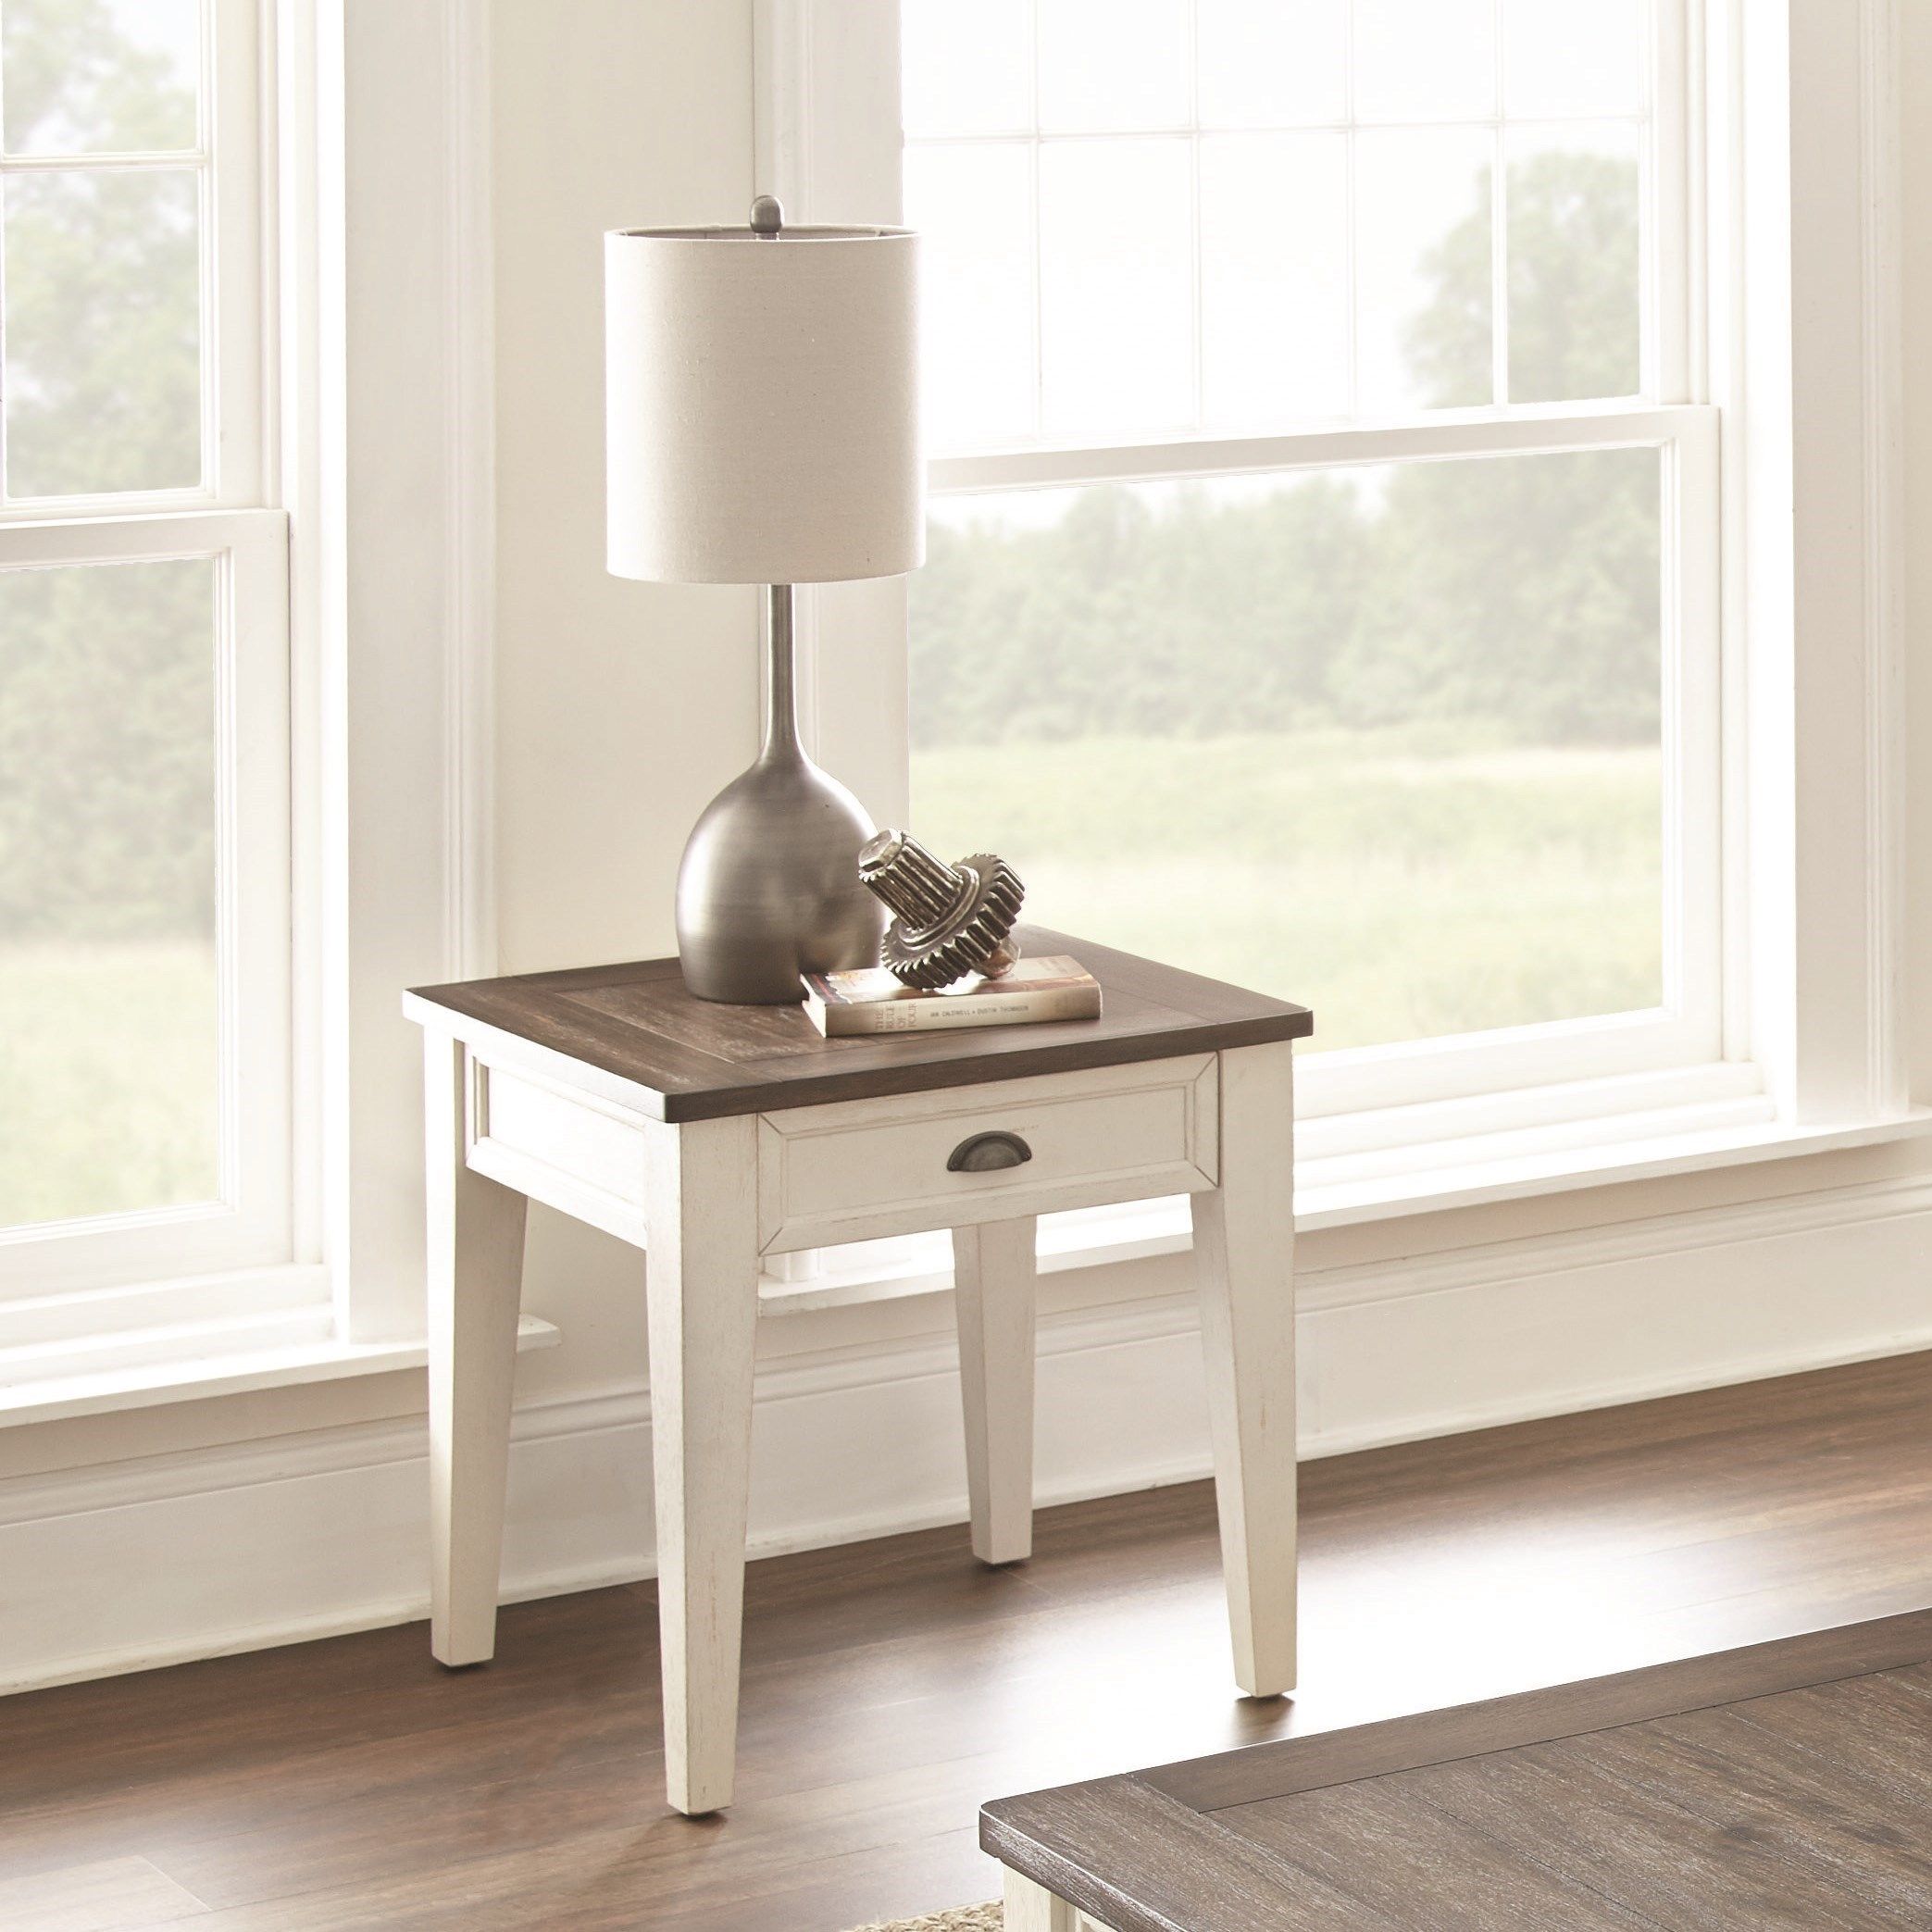 Steve Silver Clifton 949529079 Farmhouse End Table With Two Tone Finish |  Morris Home | End Tables Within Living Room Farmhouse Coffee Tables (View 6 of 15)